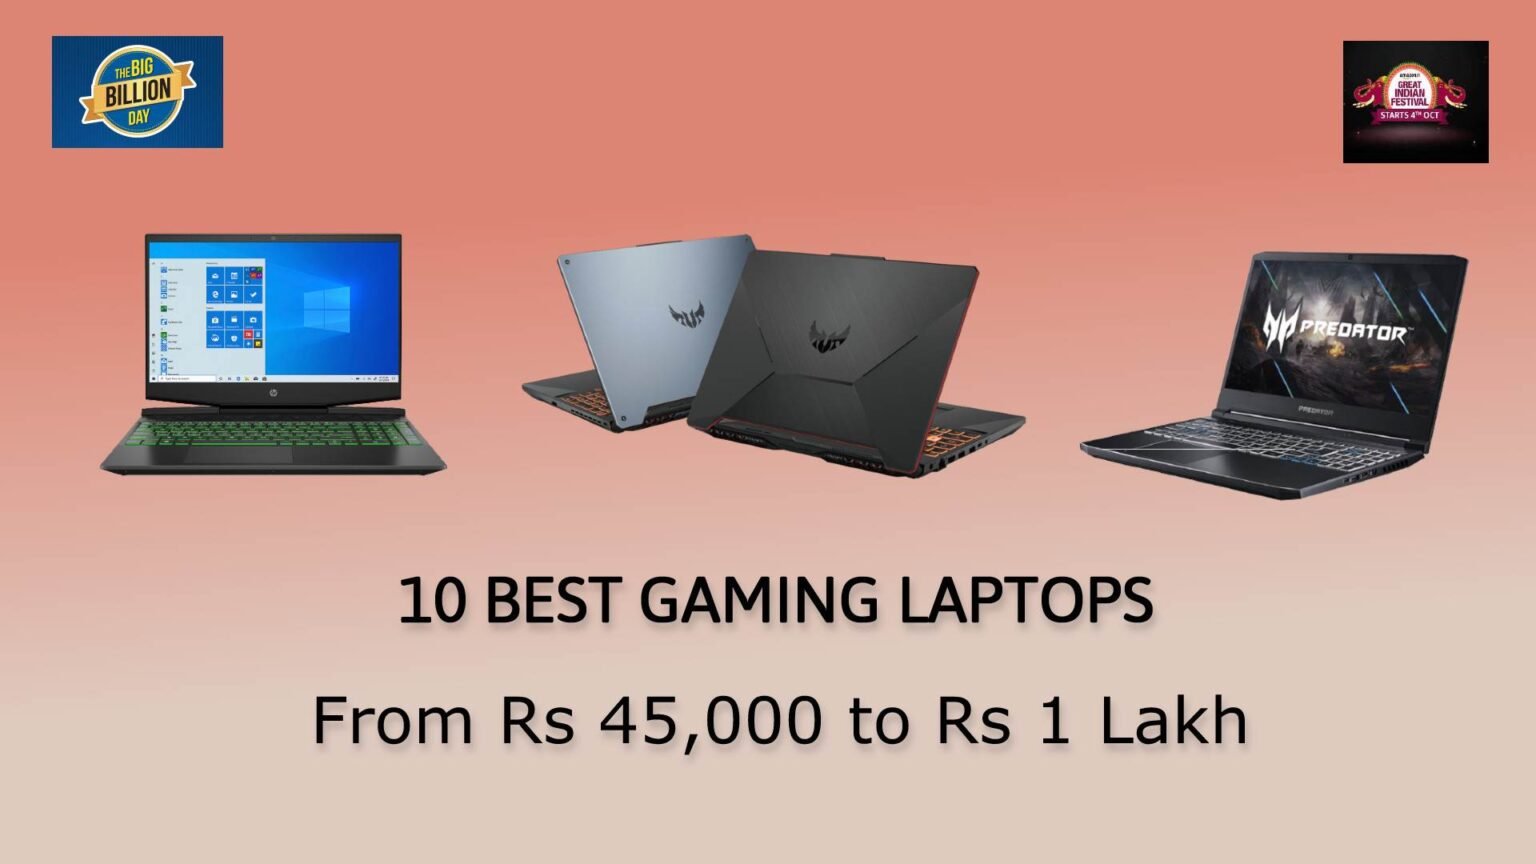 10 Best Gaming Laptops to Buy in this Festive Season (Rs 45k to 1lakh